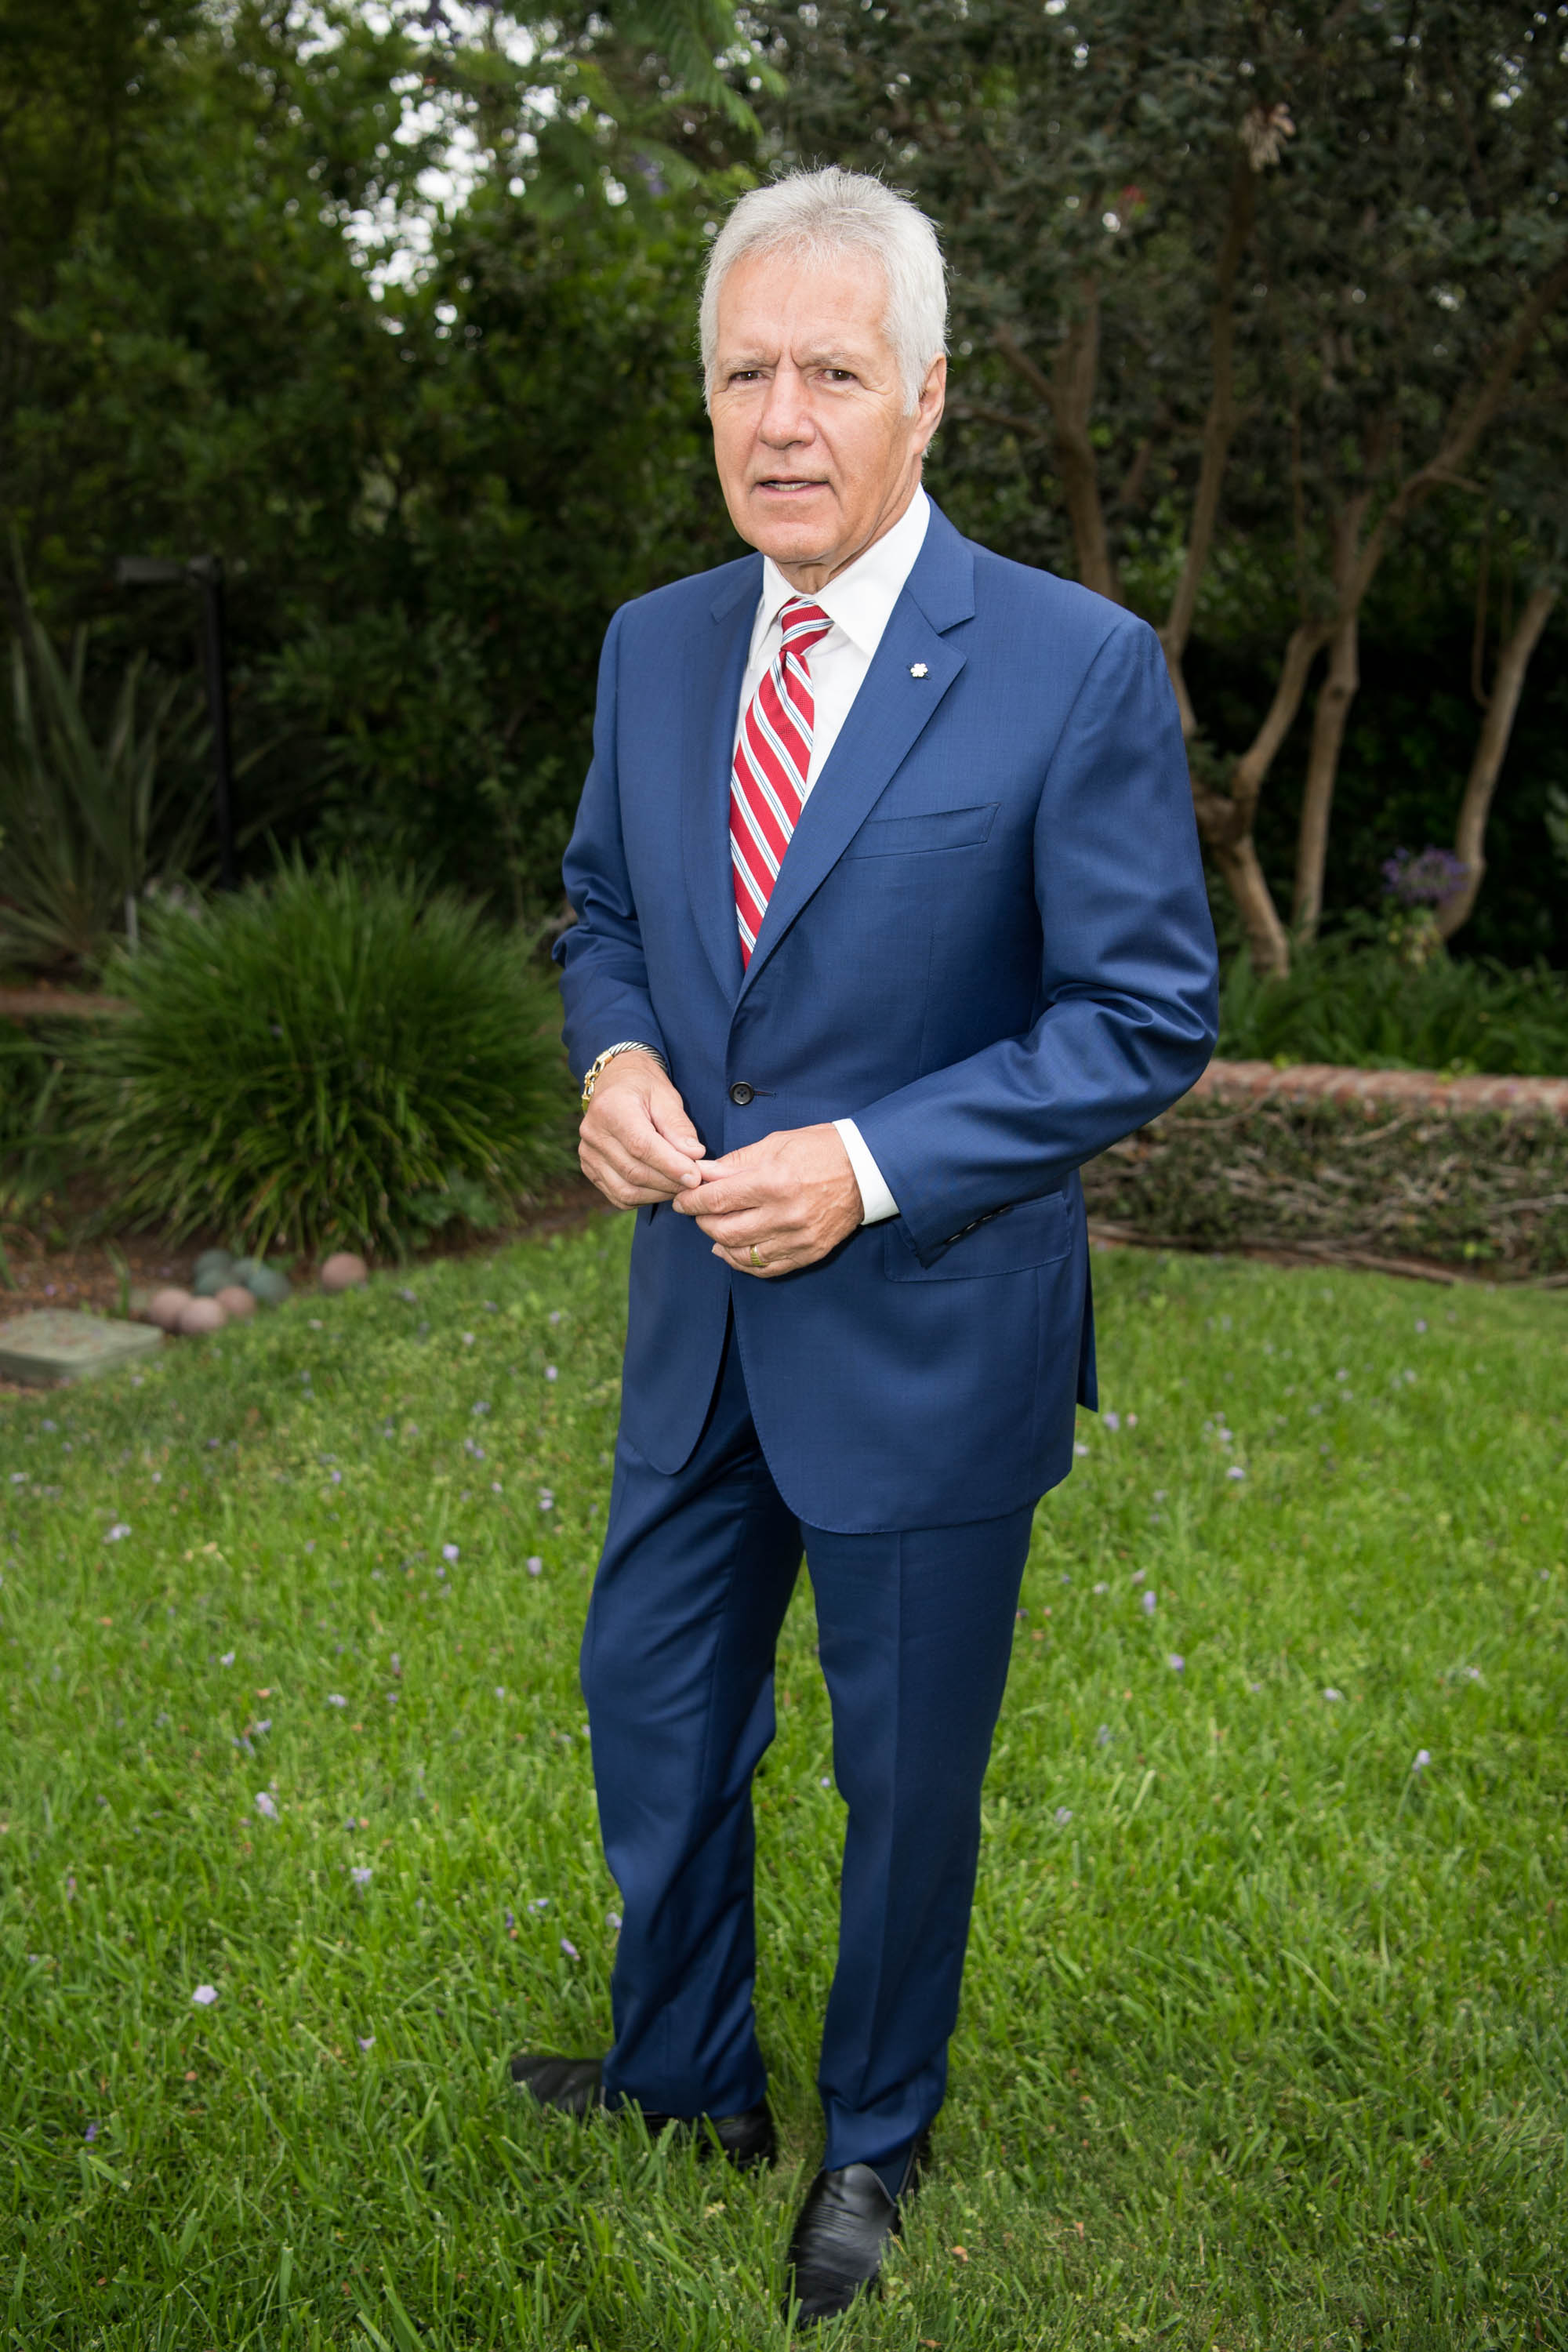 Alex Trebek at the 150th anniversary of Canada's Confederation at the Official Residence of Canada on June 30, 2017 in Los Angeles, California | Source: Getty Images